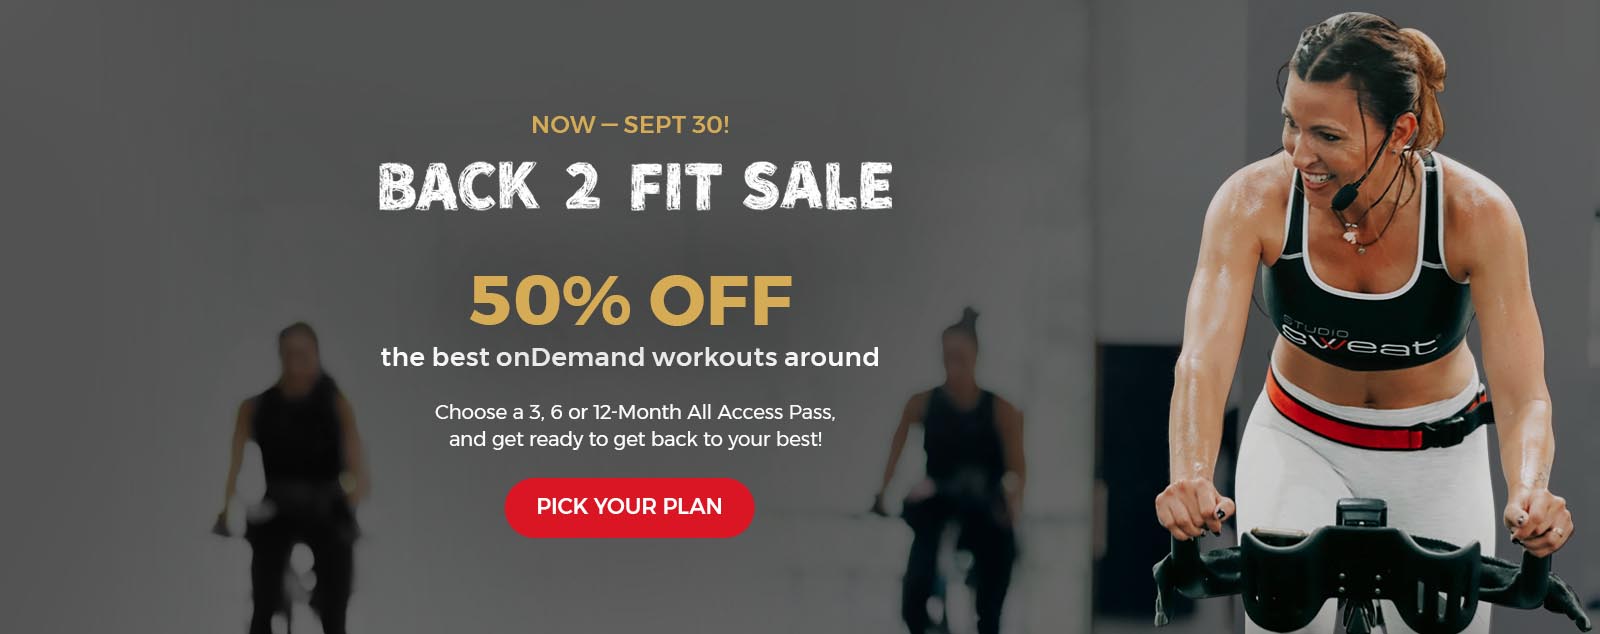 Shop Our BACK TO FIT SALE SUPER SALE and Get Unlimited Access to Studio SWEAT onDemand Indoor Cycling and Training workouts from home!